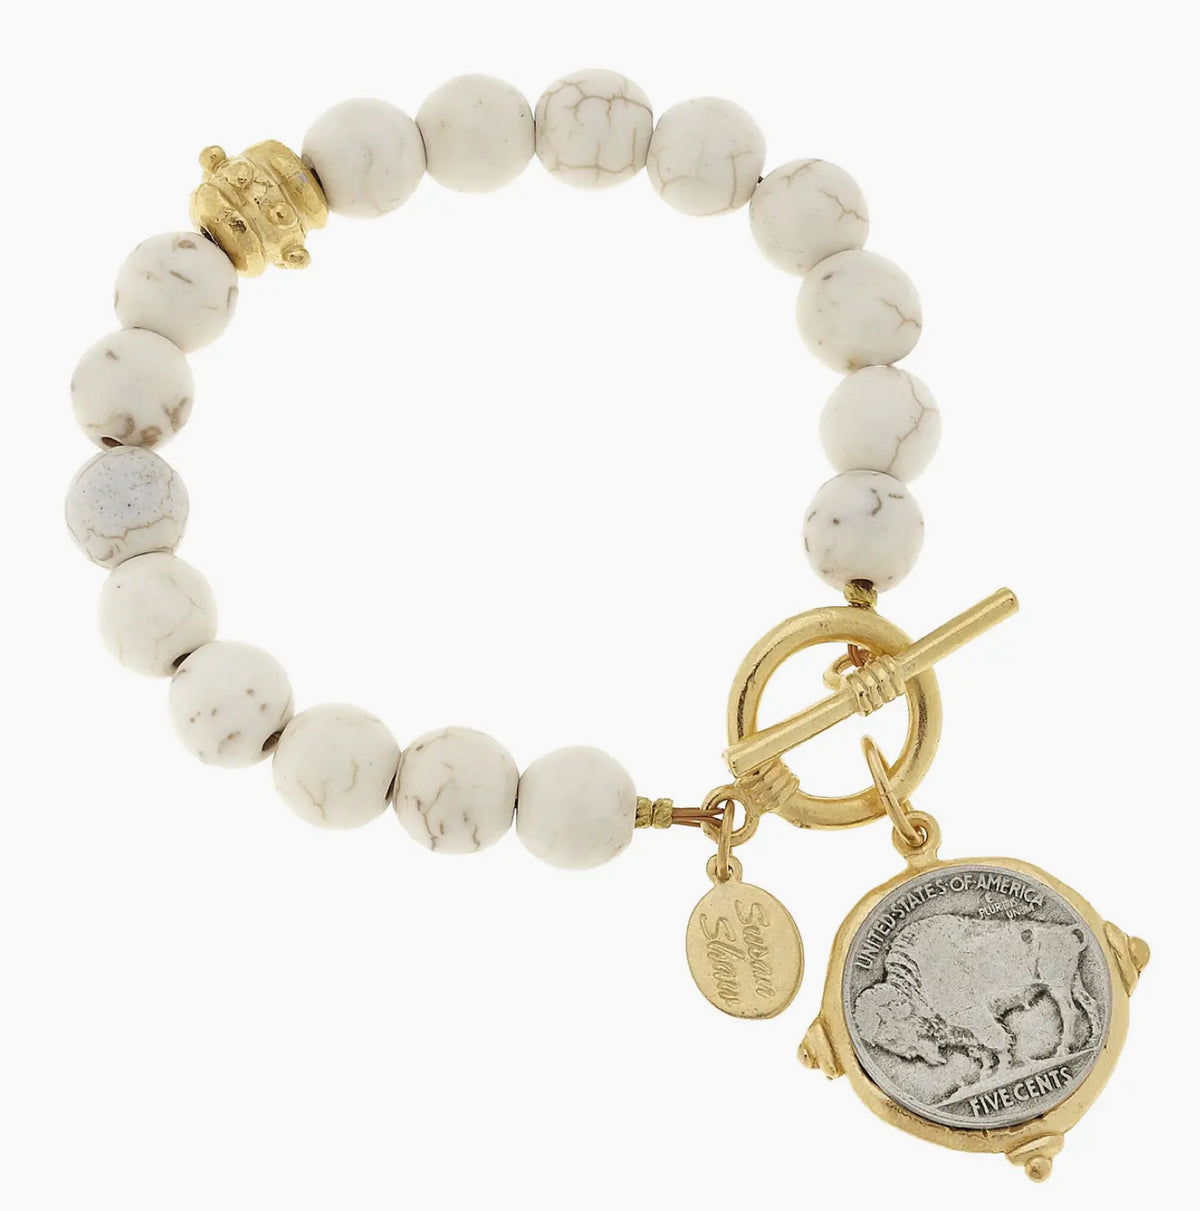 Susan Shaw Gold and Silver Genuine Buffalo Nickel On White Turquoise Bracelet